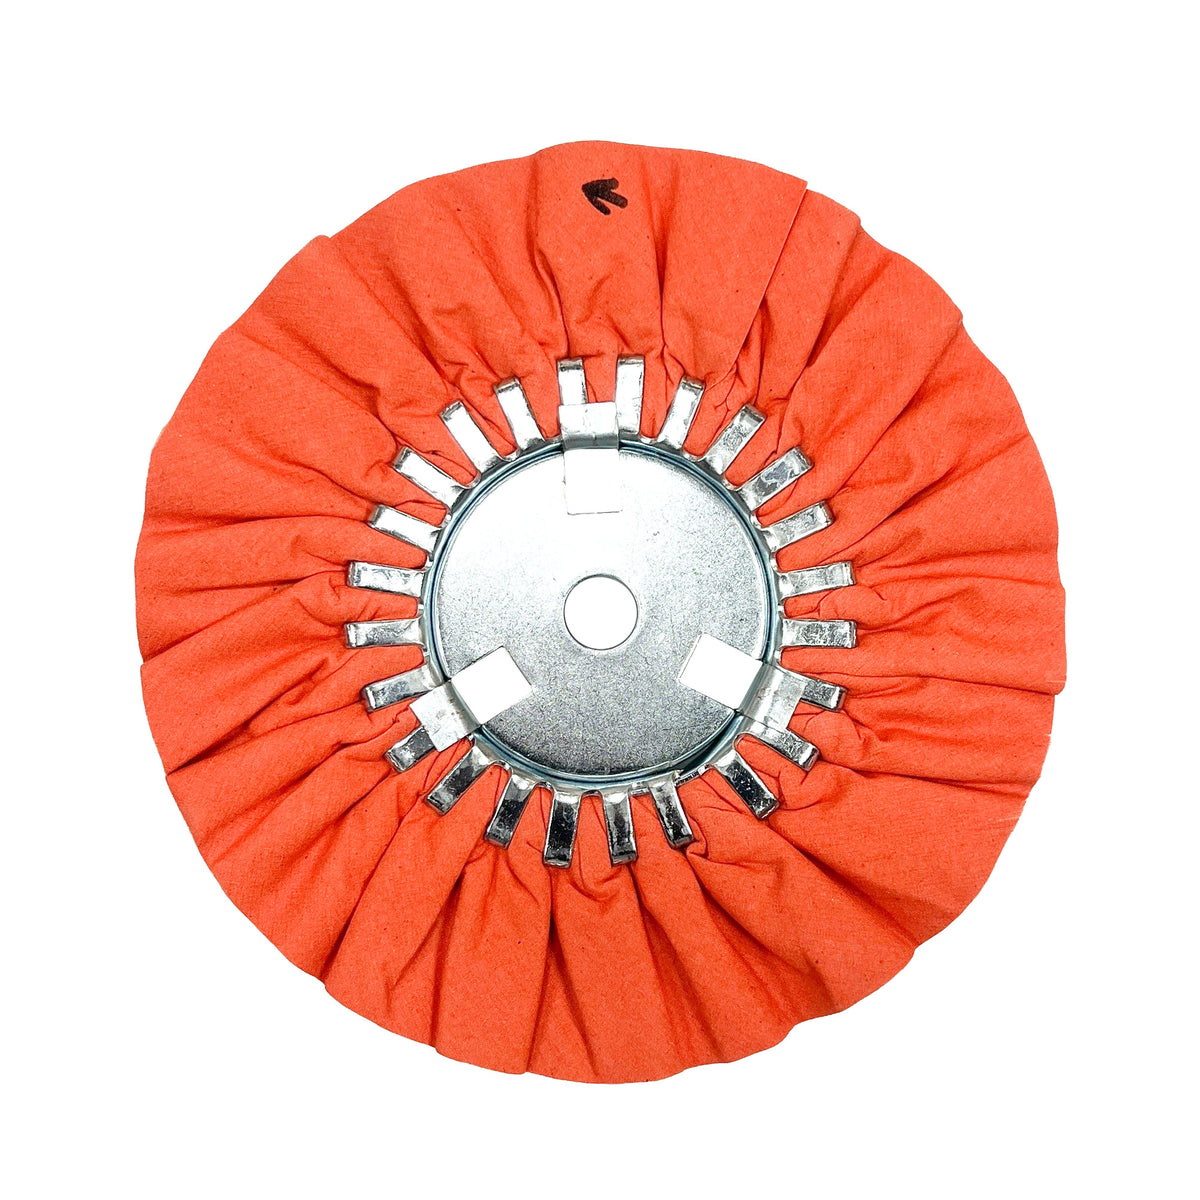 Renegade Products USA&#39;s orange airway buffing wheel with center plate, designed for efficient and professional buffing and polishing tasks